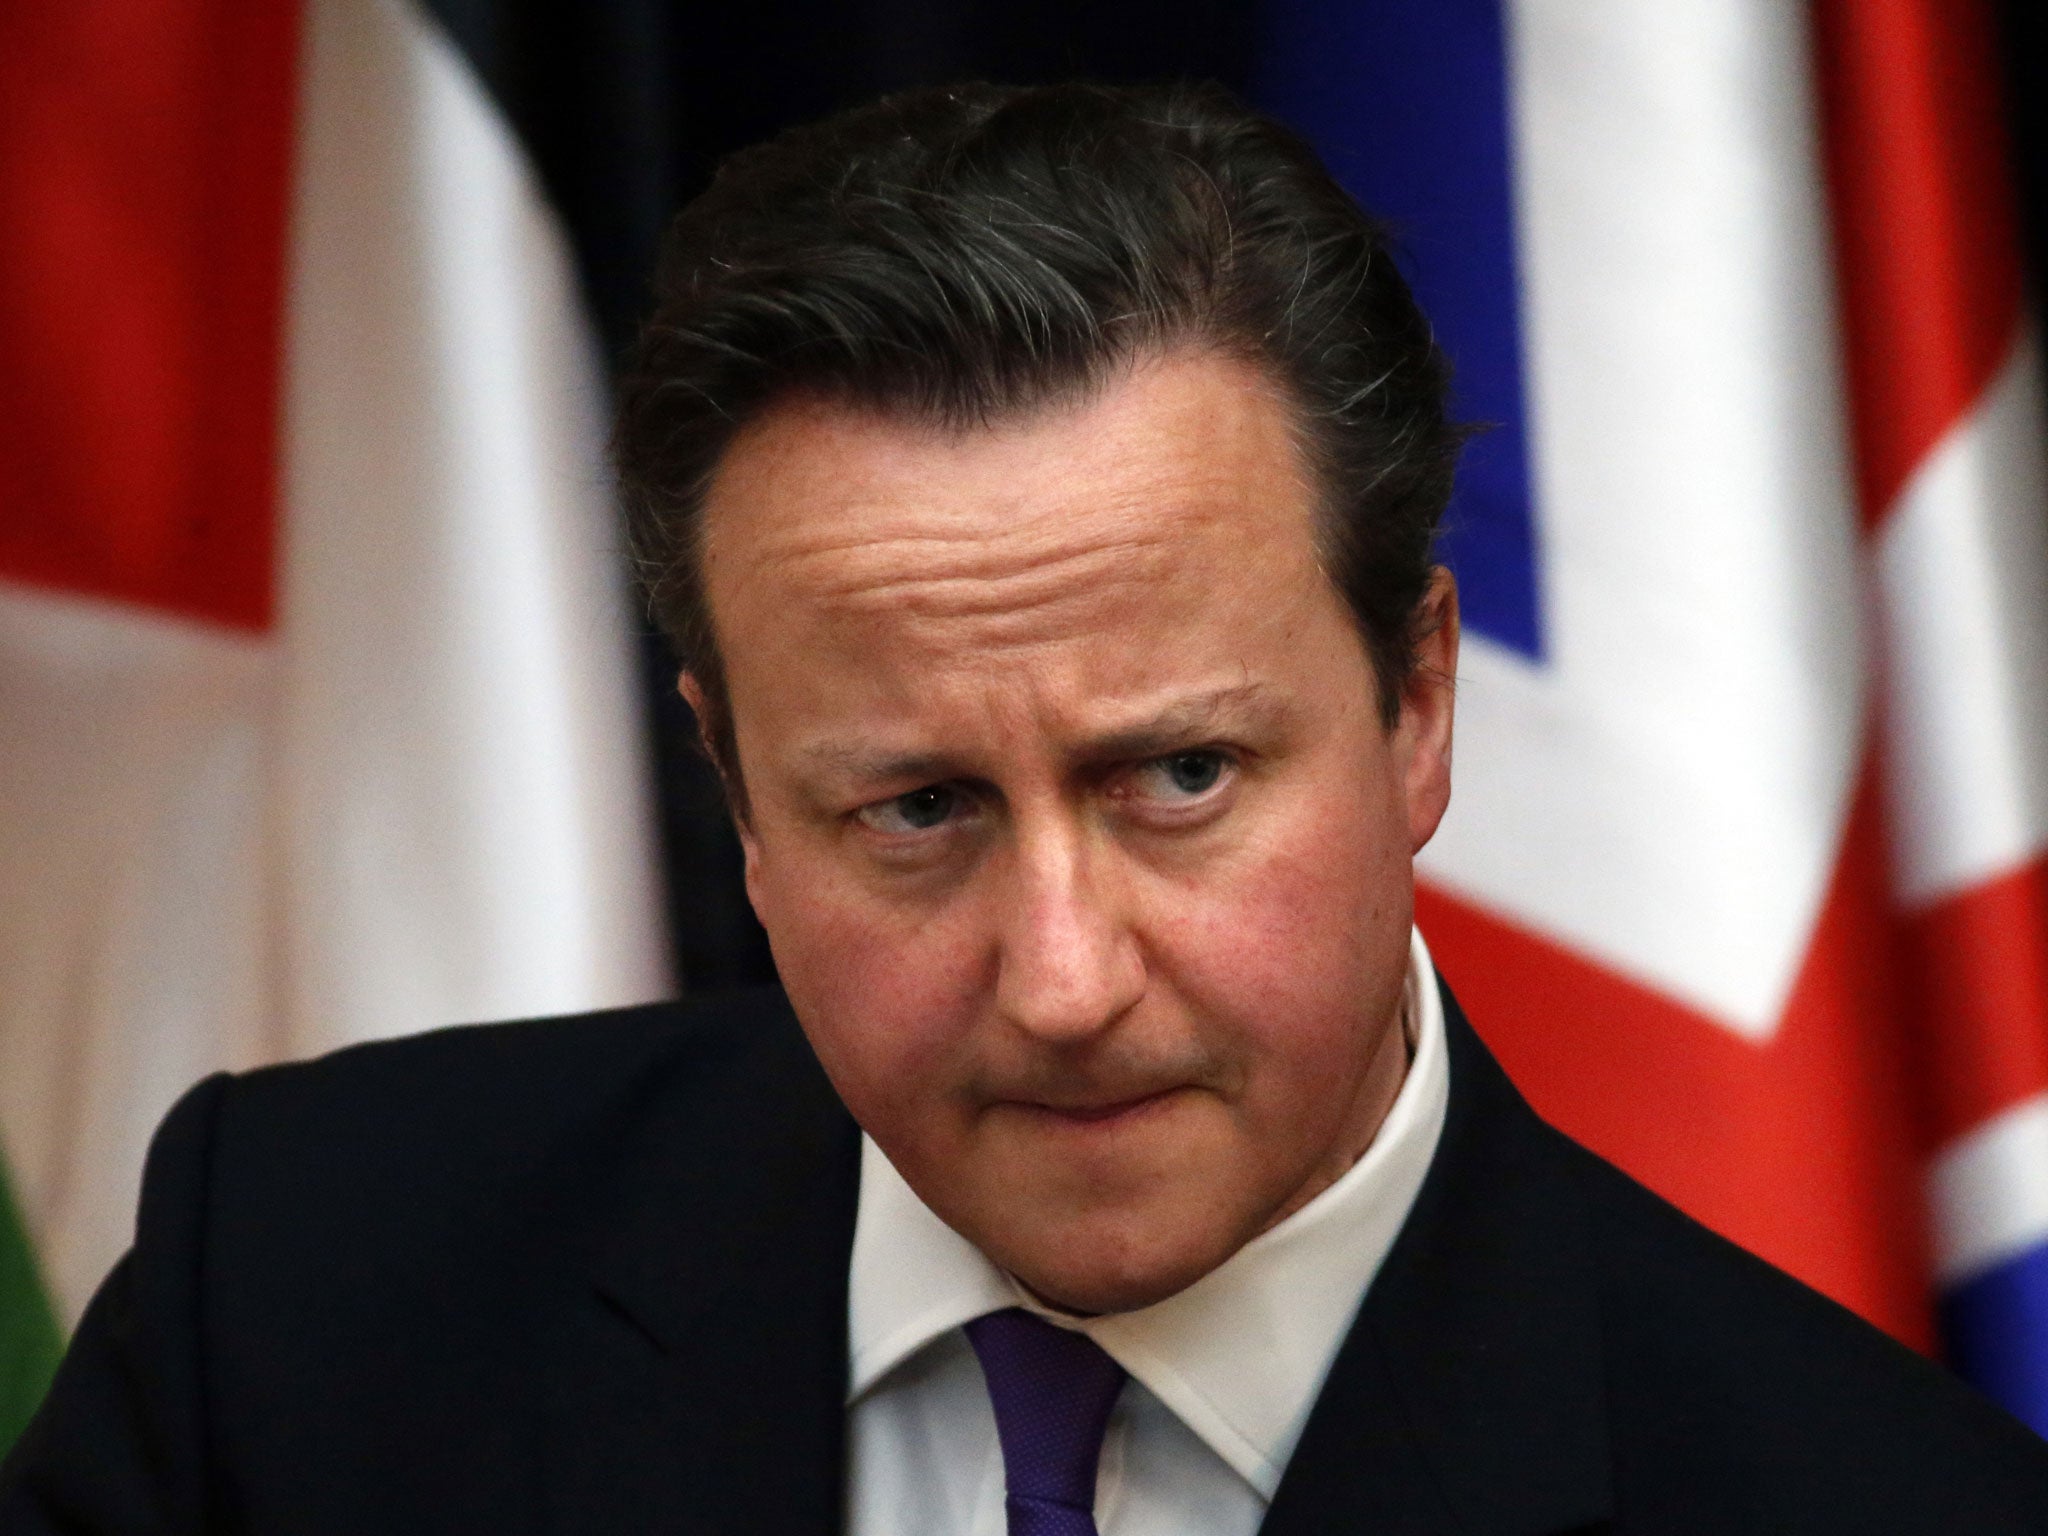 British Prime Minister David Cameron delivers a speech during a joint press conference in Palestine on 13 March, 2014.